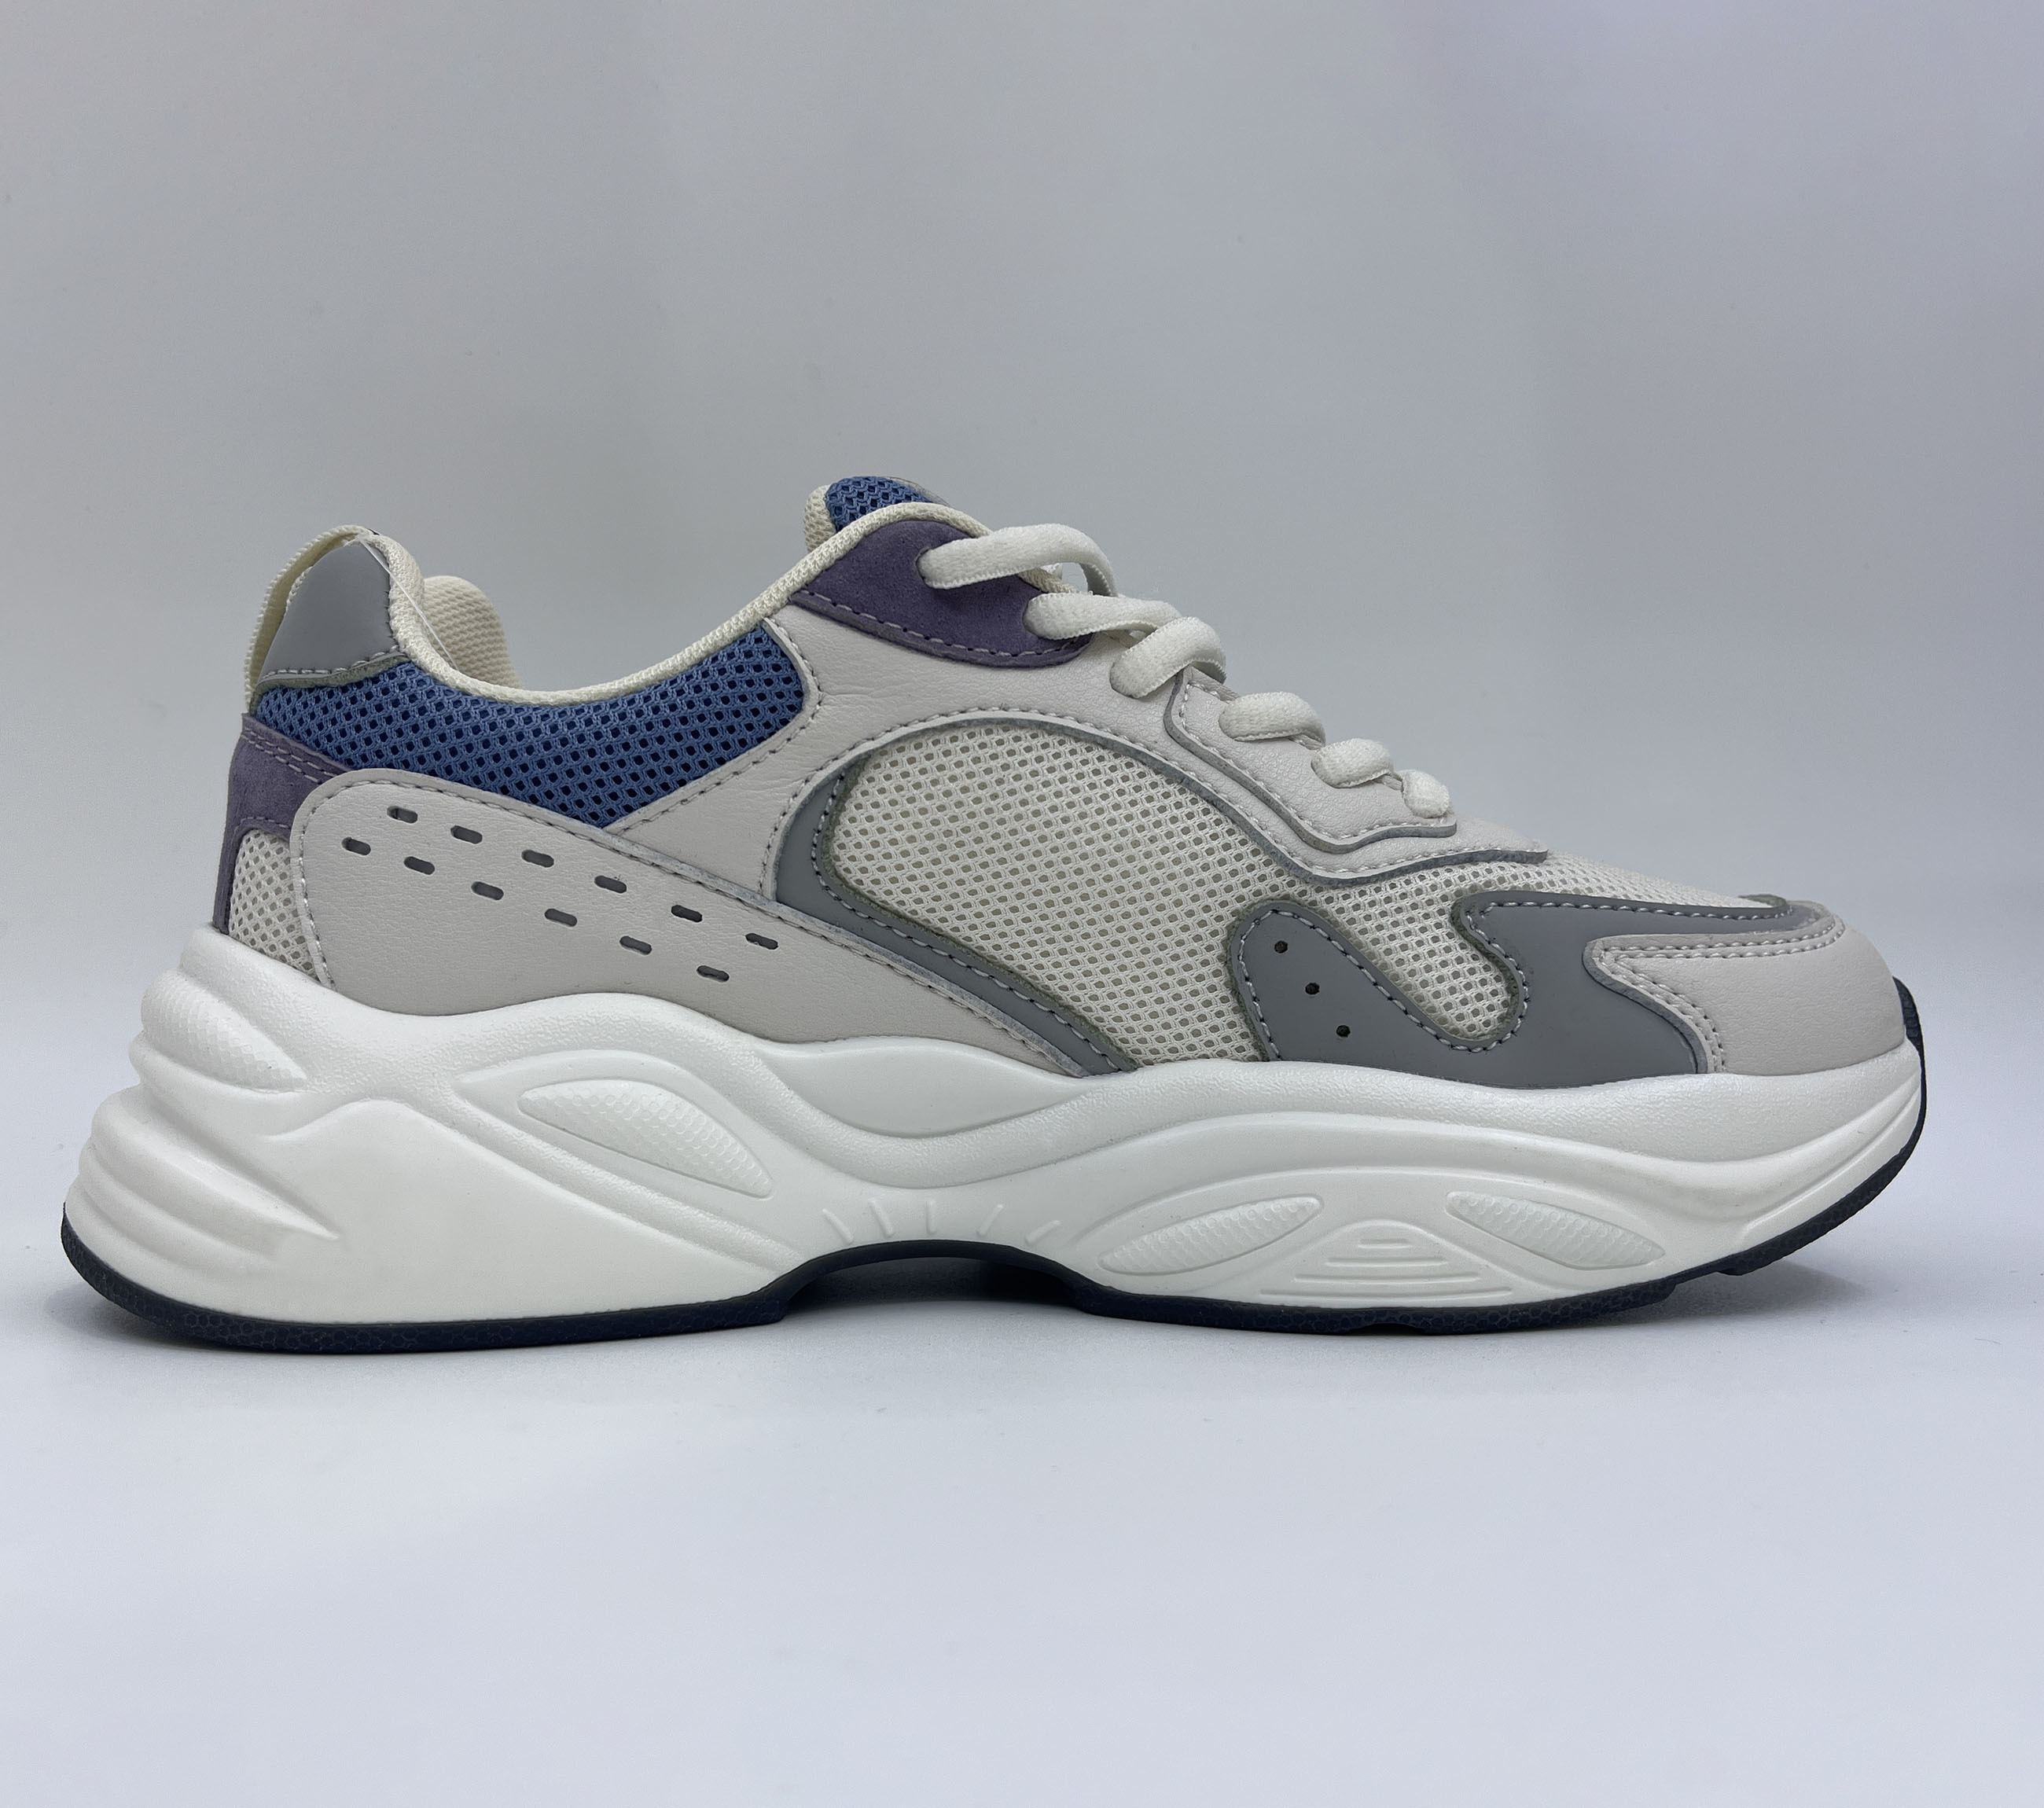 Cheap Pu and mesh upper breathable casual running sport shoes from China manufacturer